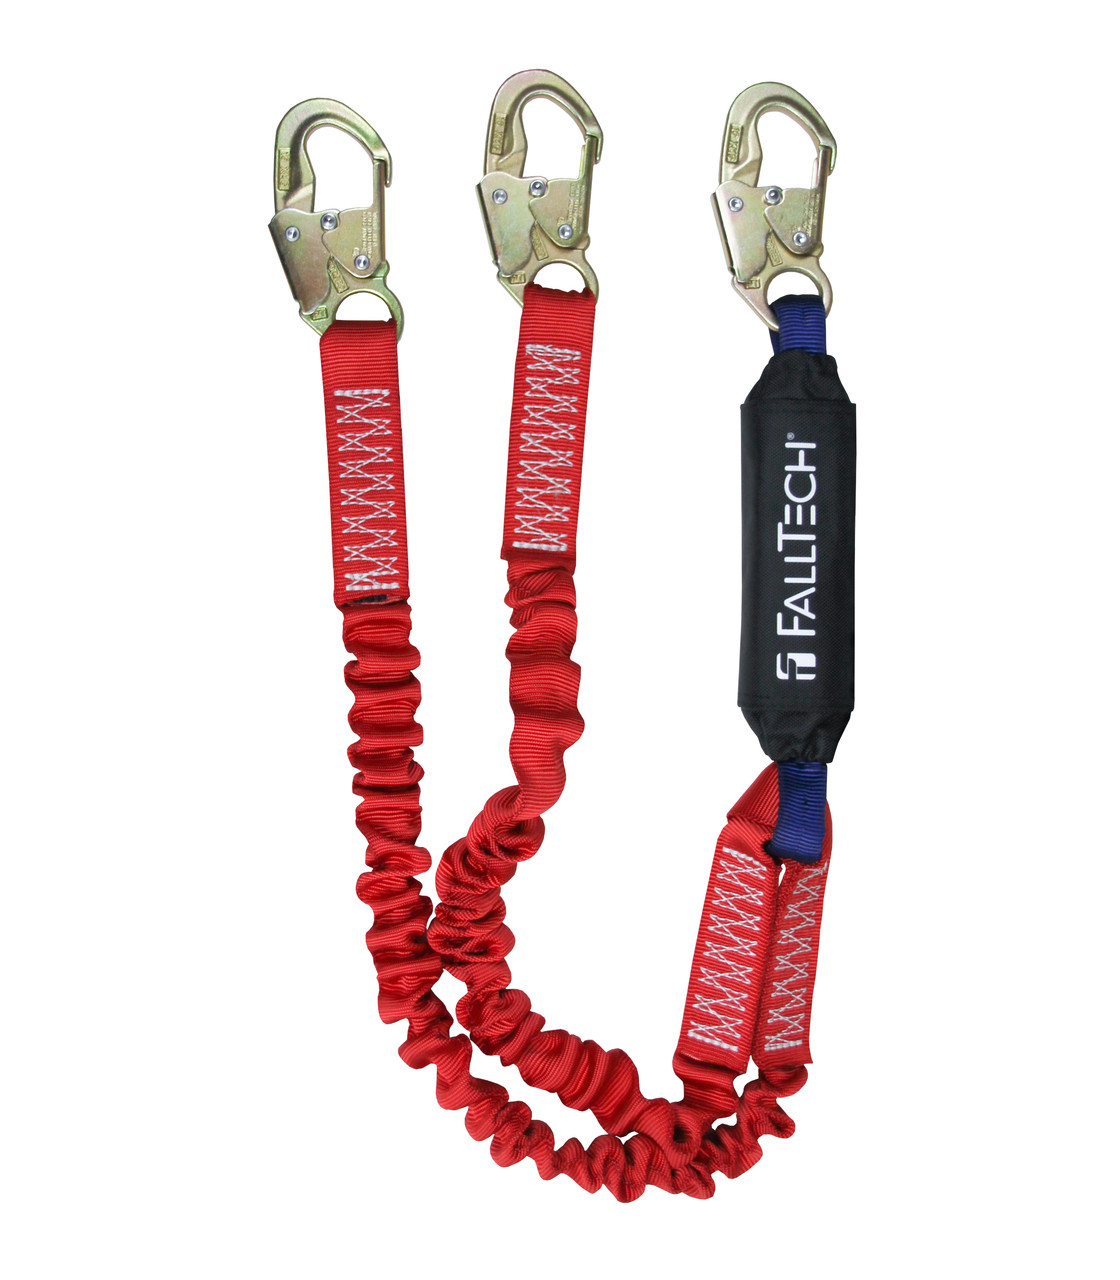 Falltech 8247EY Dual-class Y-Leg Lanyard + Snap Hooks 4 1/2' to 6' -  Industrial Safety Products